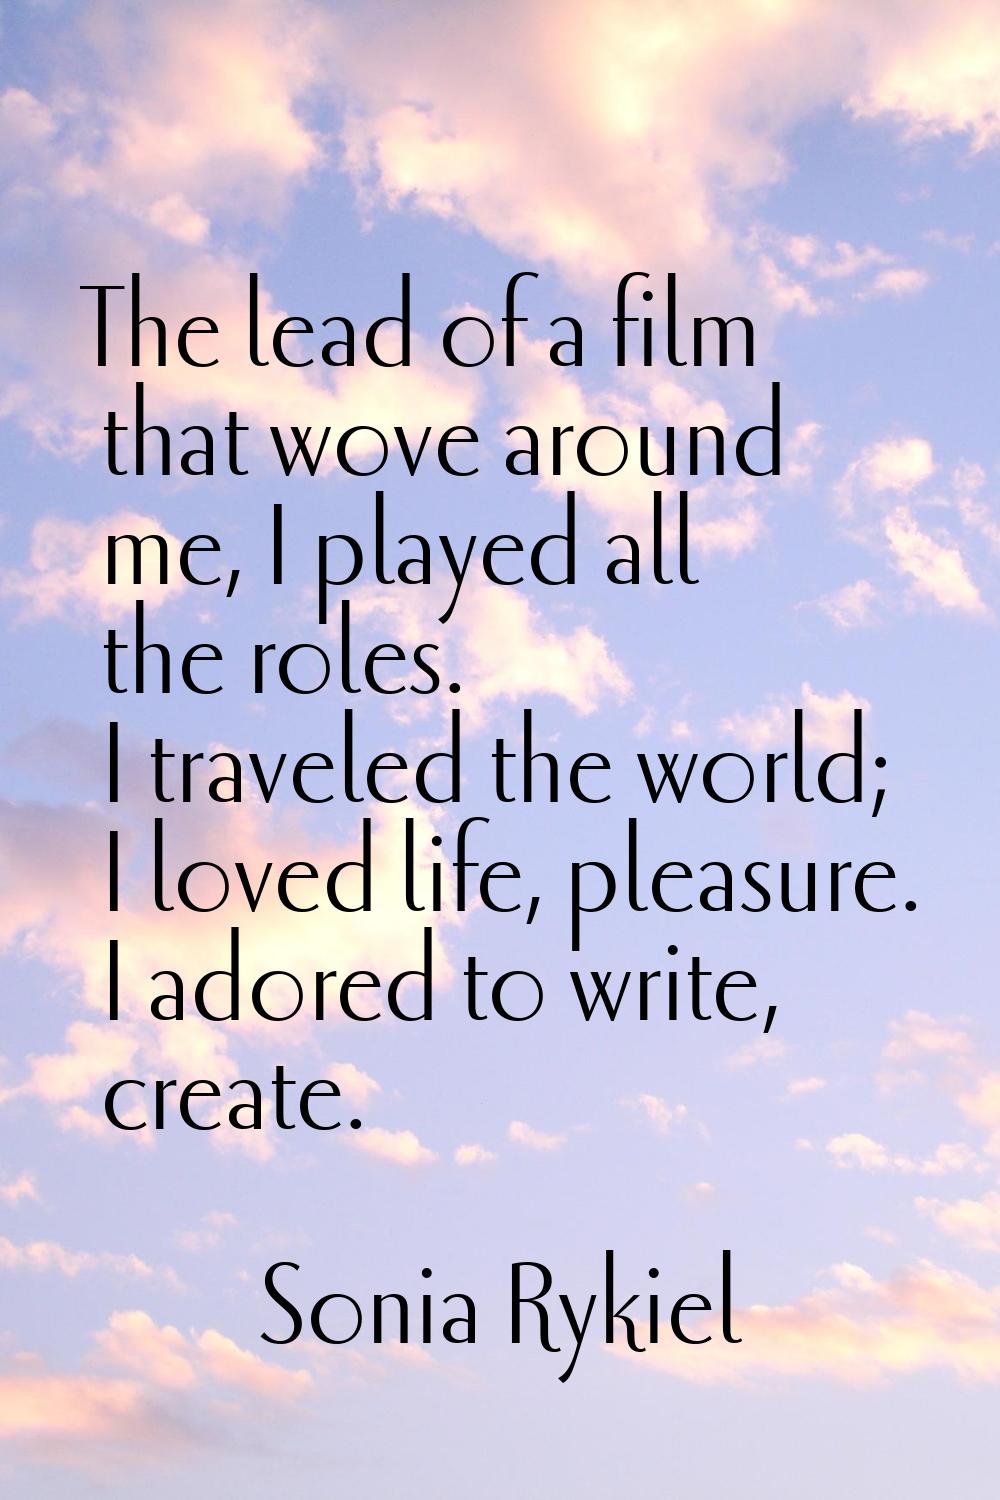 The lead of a film that wove around me, I played all the roles. I traveled the world; I loved life,